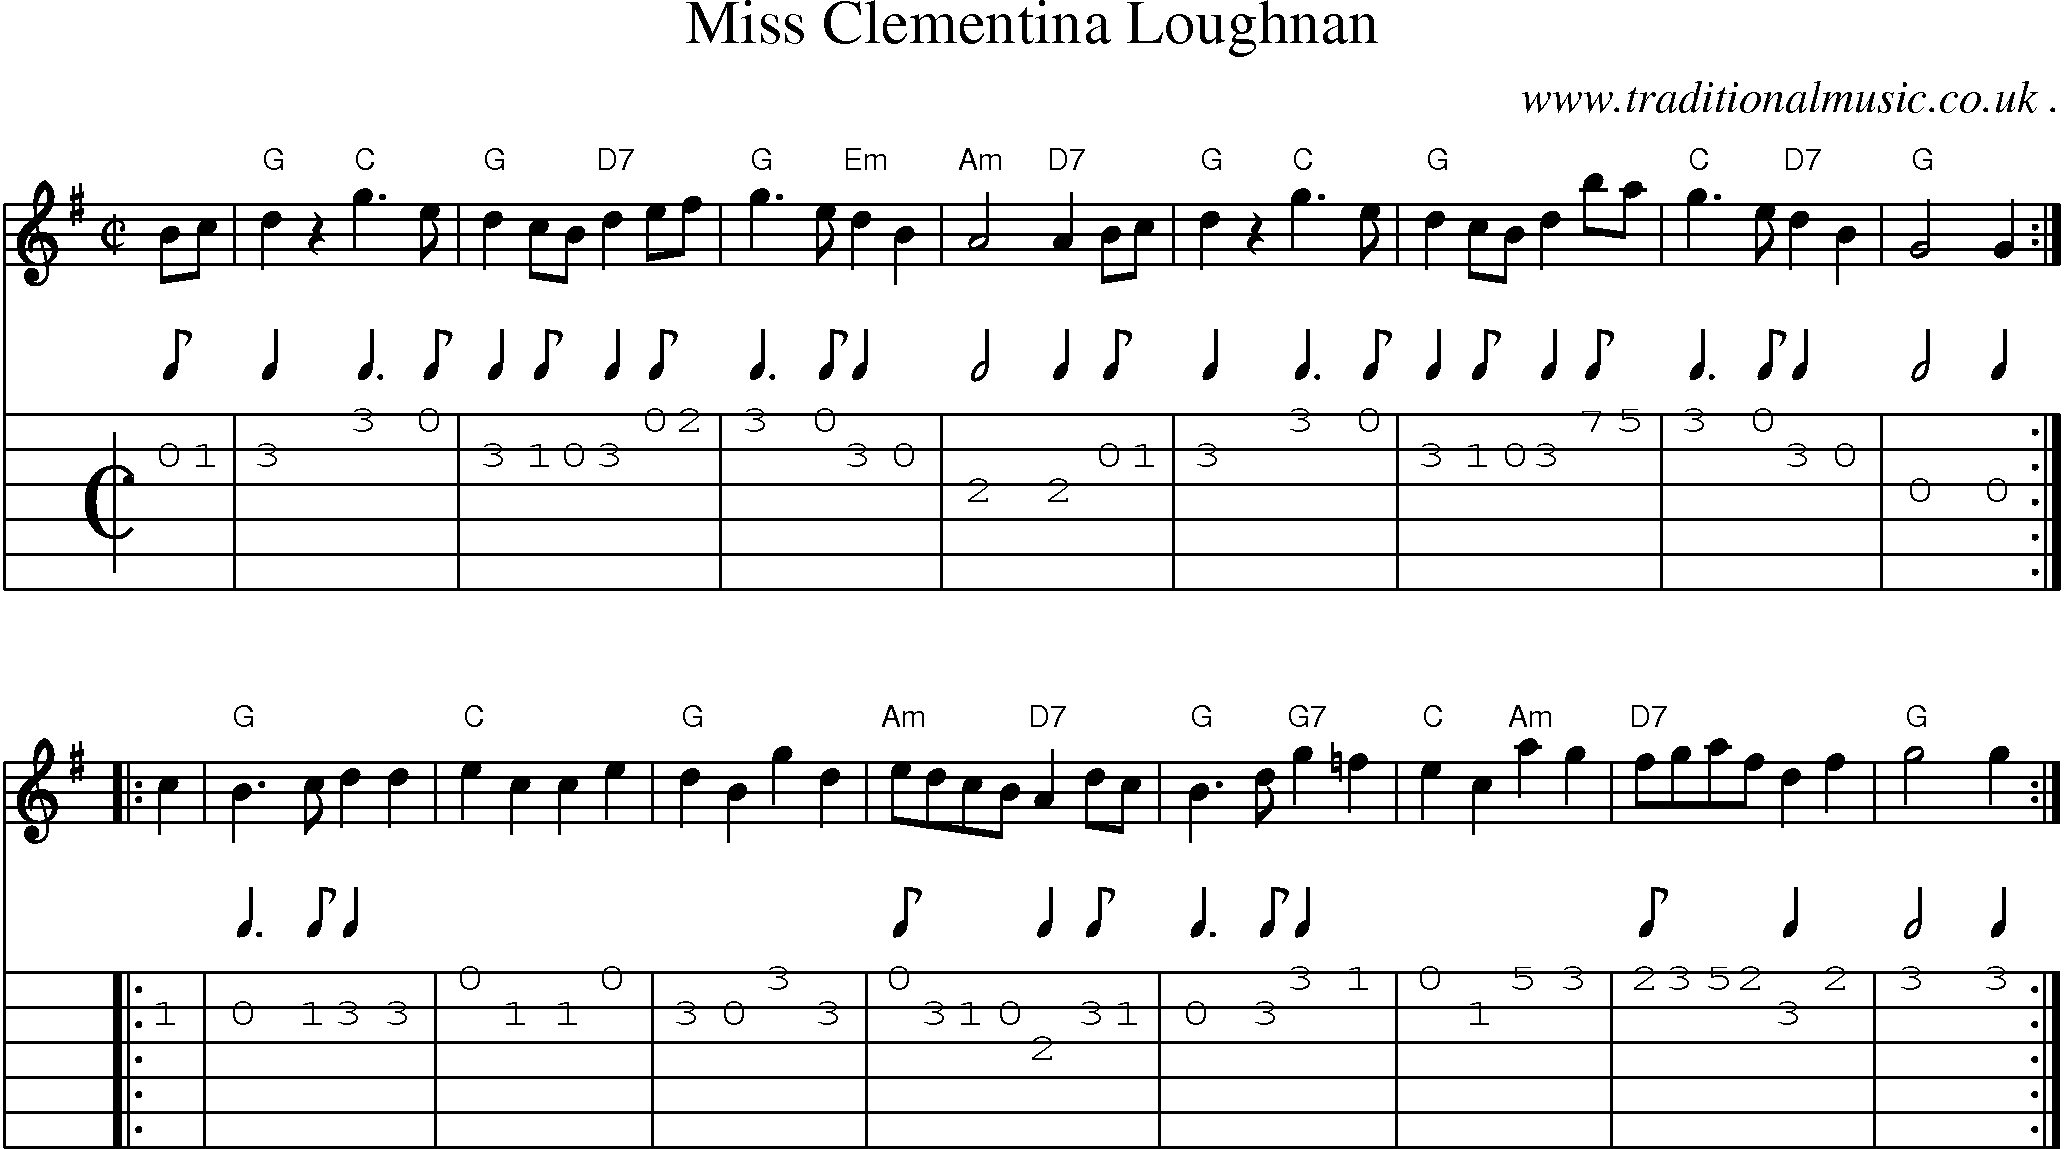 Sheet-music  score, Chords and Guitar Tabs for Miss Clementina Loughnan